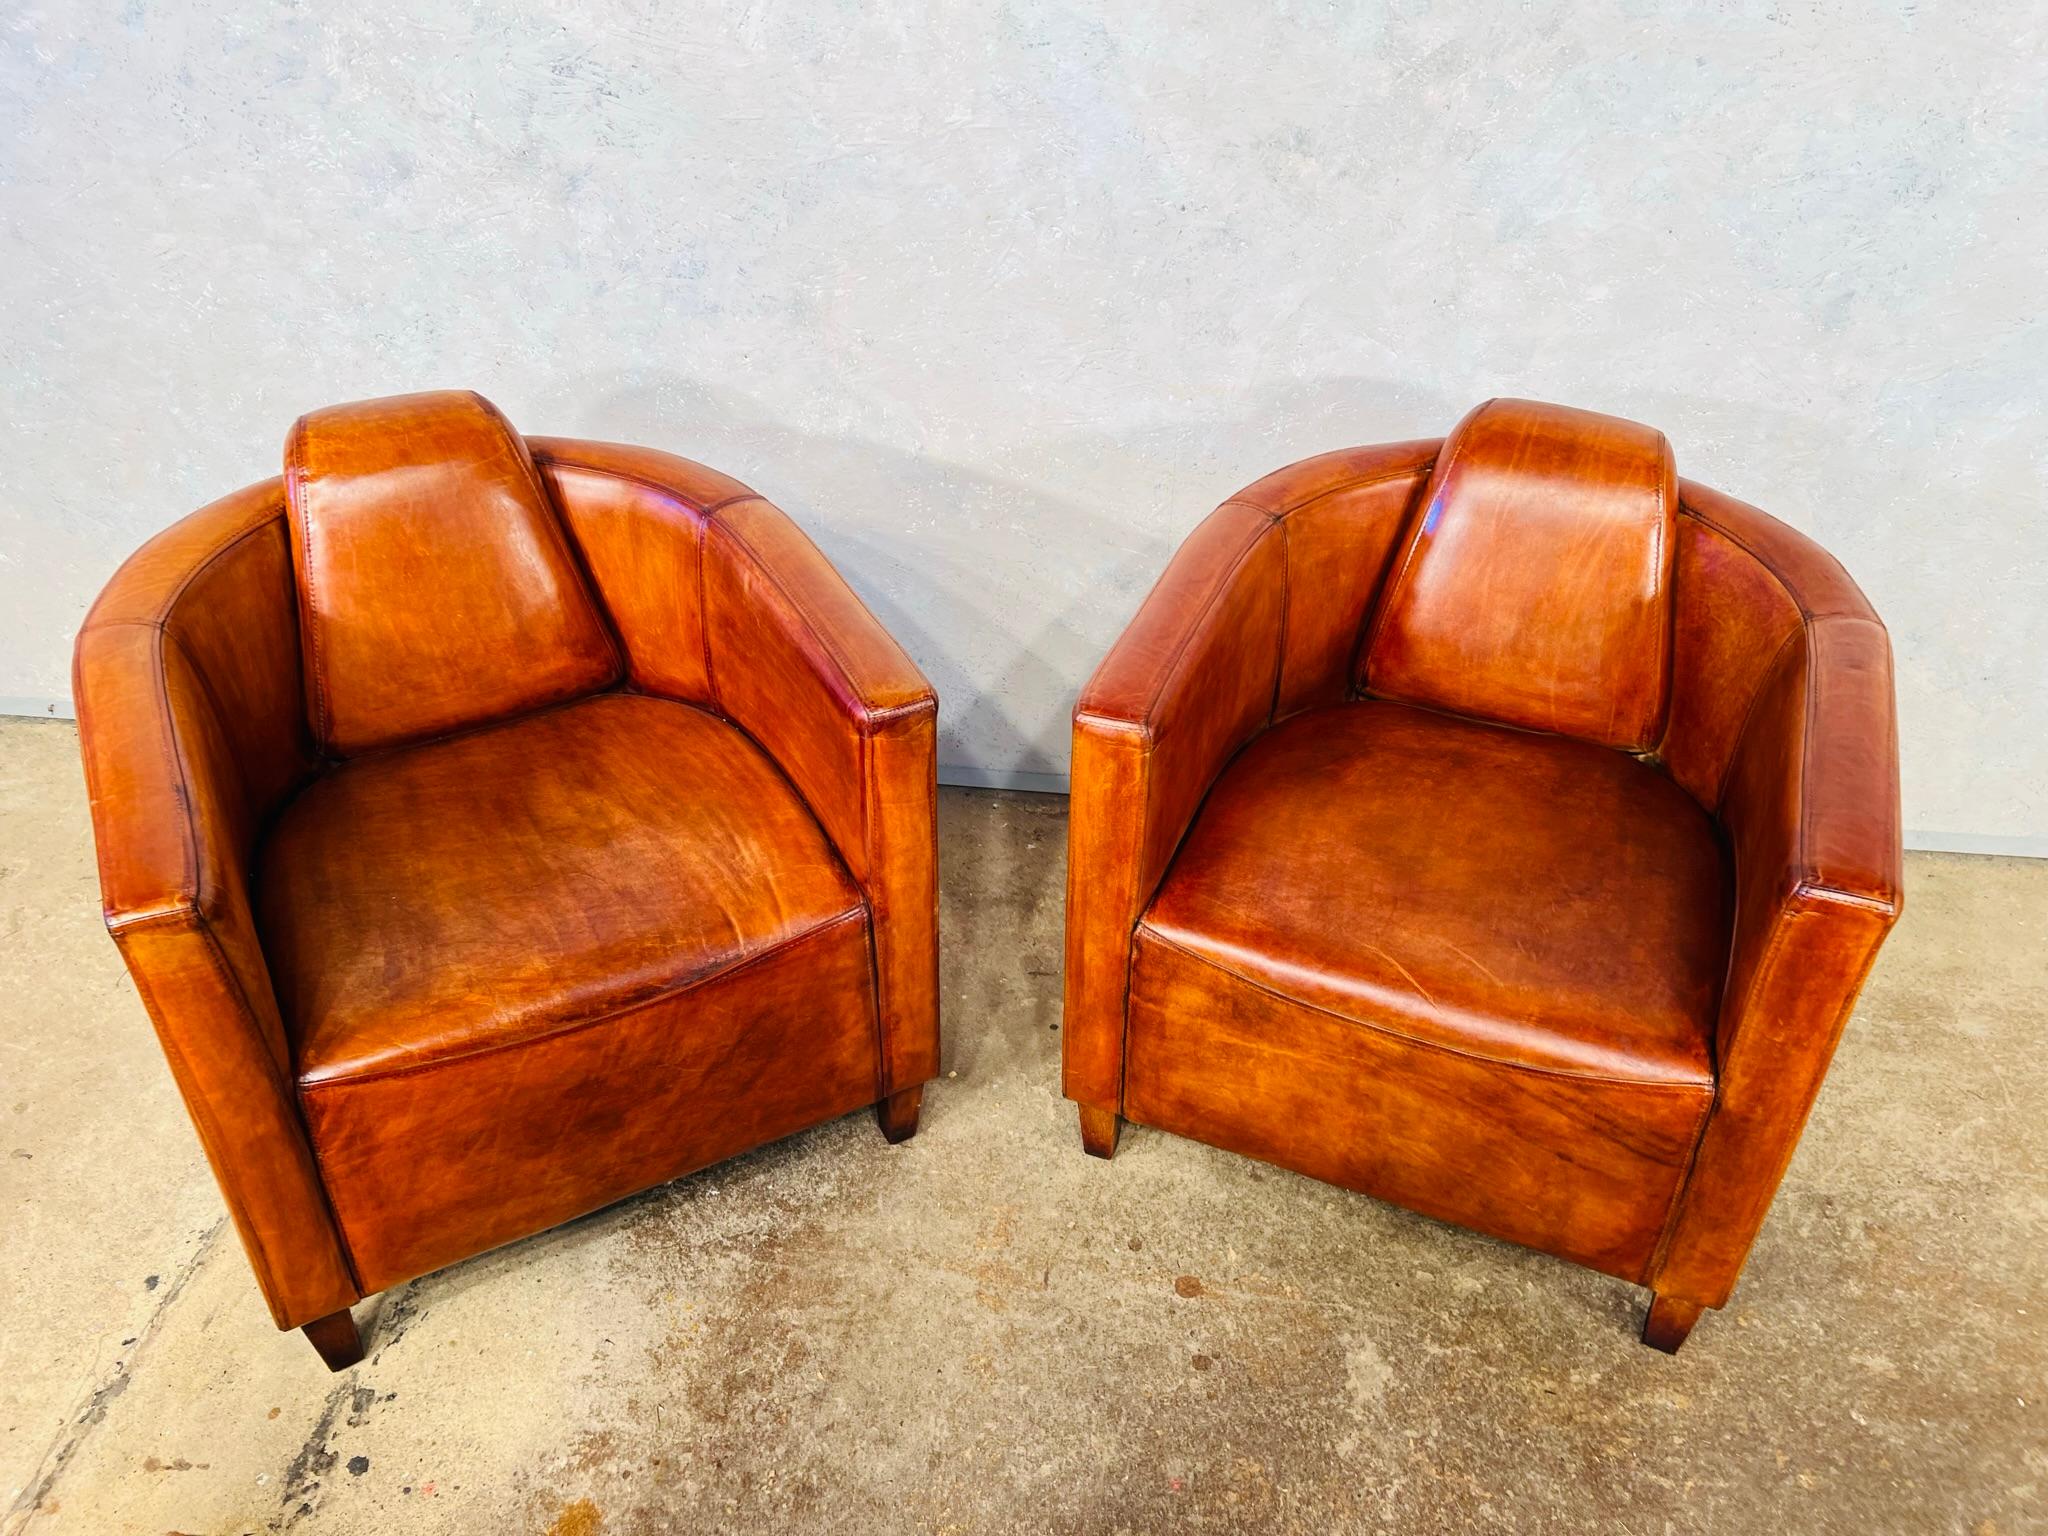 20th Century Stunning Pair of Art Deco Aviator Leather Chairs, Hand Dyed Tan #630